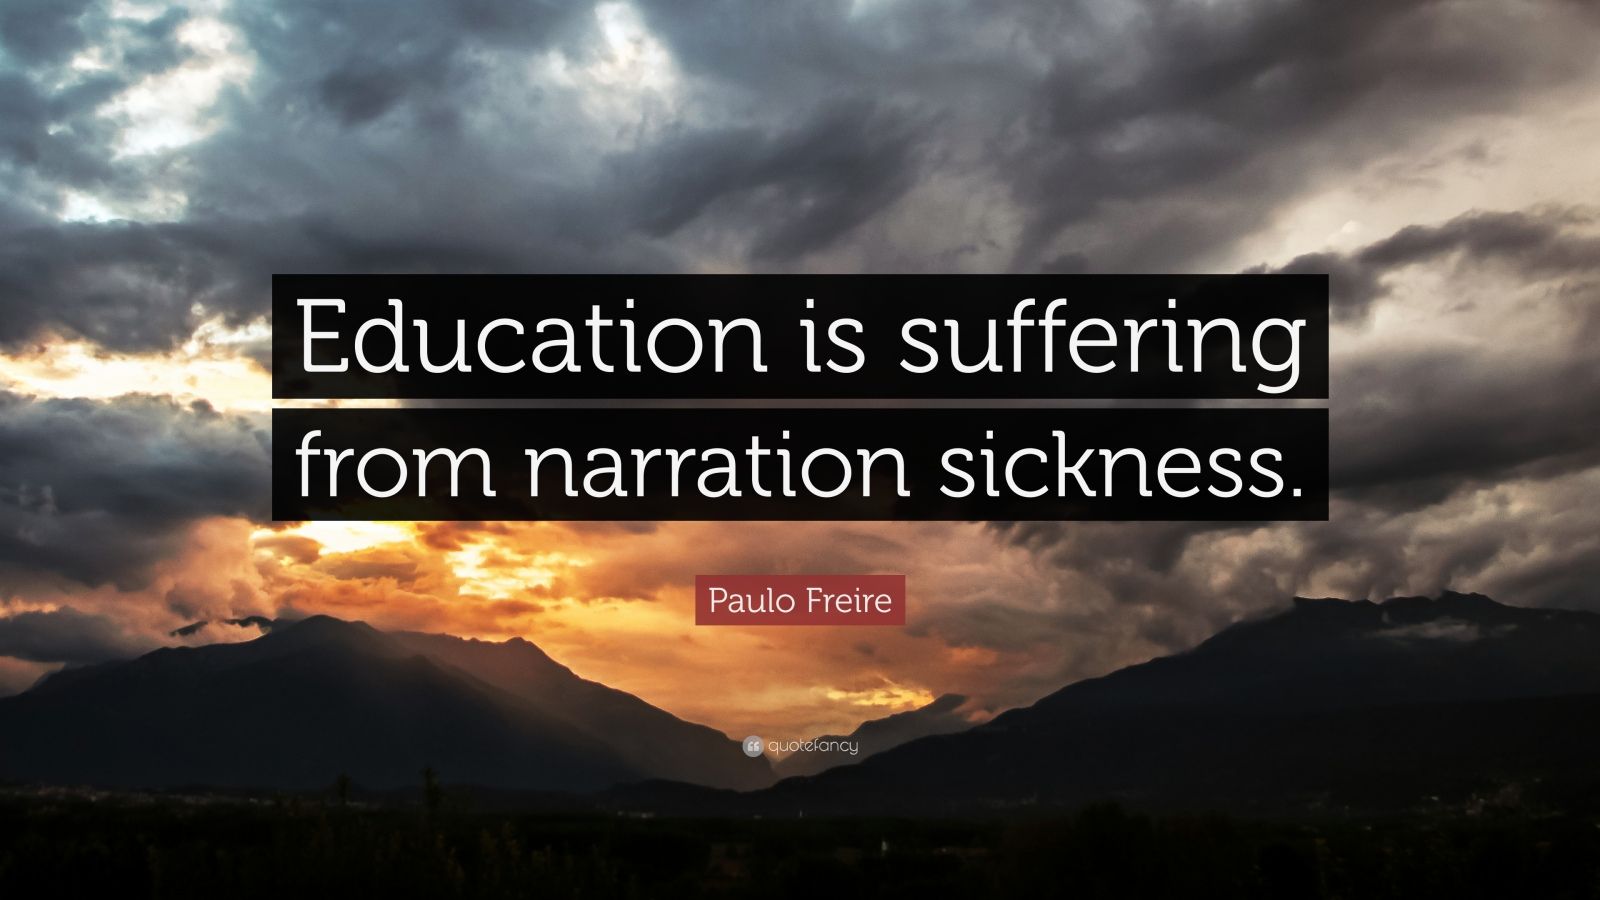 Top 150 Paulo Freire Quotes | 2021 Edition | Free Images - QuoteFancy